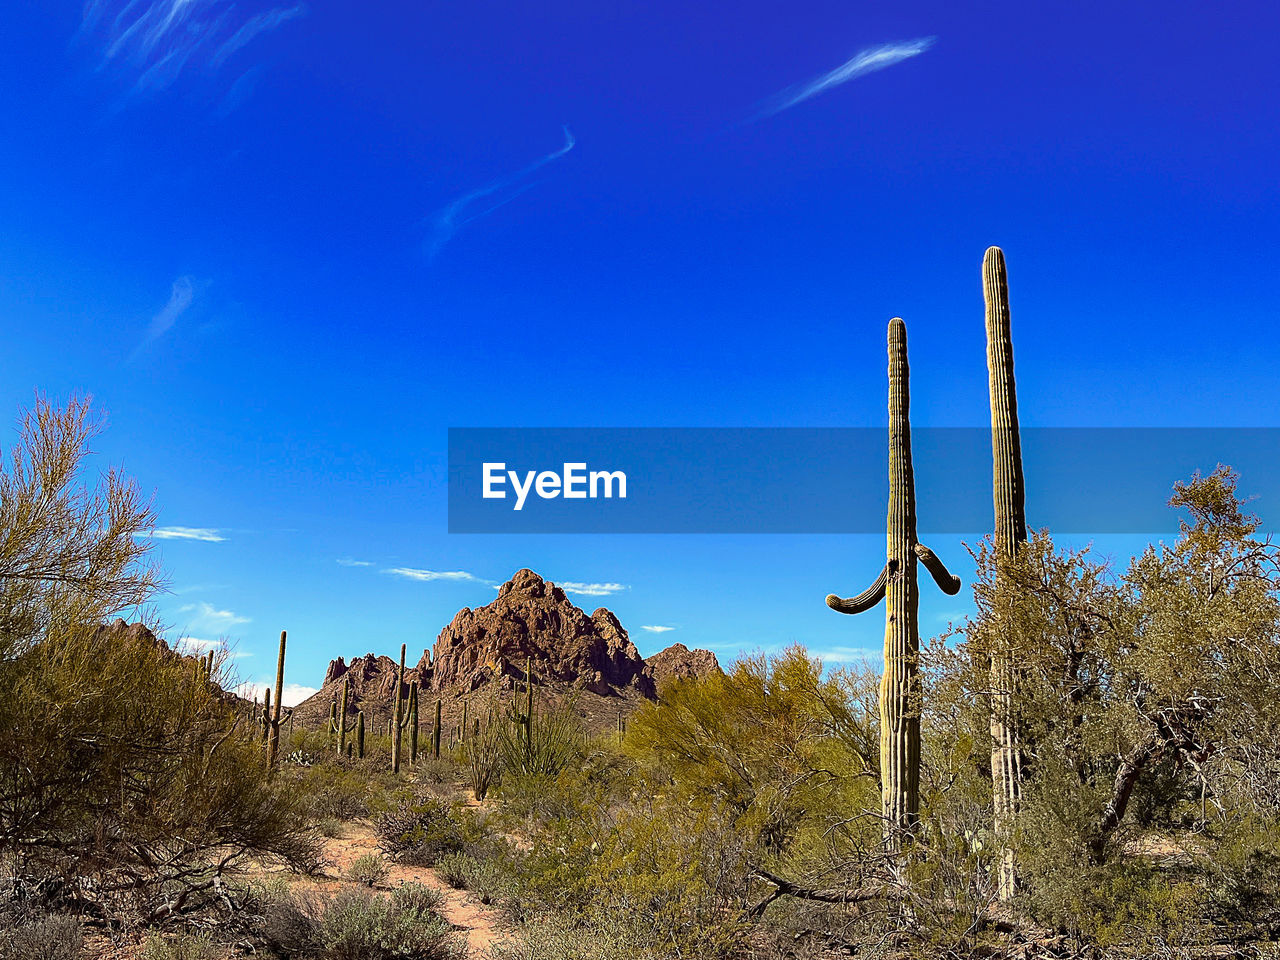 sky, cactus, succulent plant, plant, nature, blue, mountain, scenics - nature, desert, landscape, environment, saguaro cactus, wilderness, tree, no people, land, beauty in nature, semi-arid, non-urban scene, rock, clear sky, tranquility, outdoors, tranquil scene, natural environment, travel destinations, cloud, sunny, arid climate, travel, growth, day